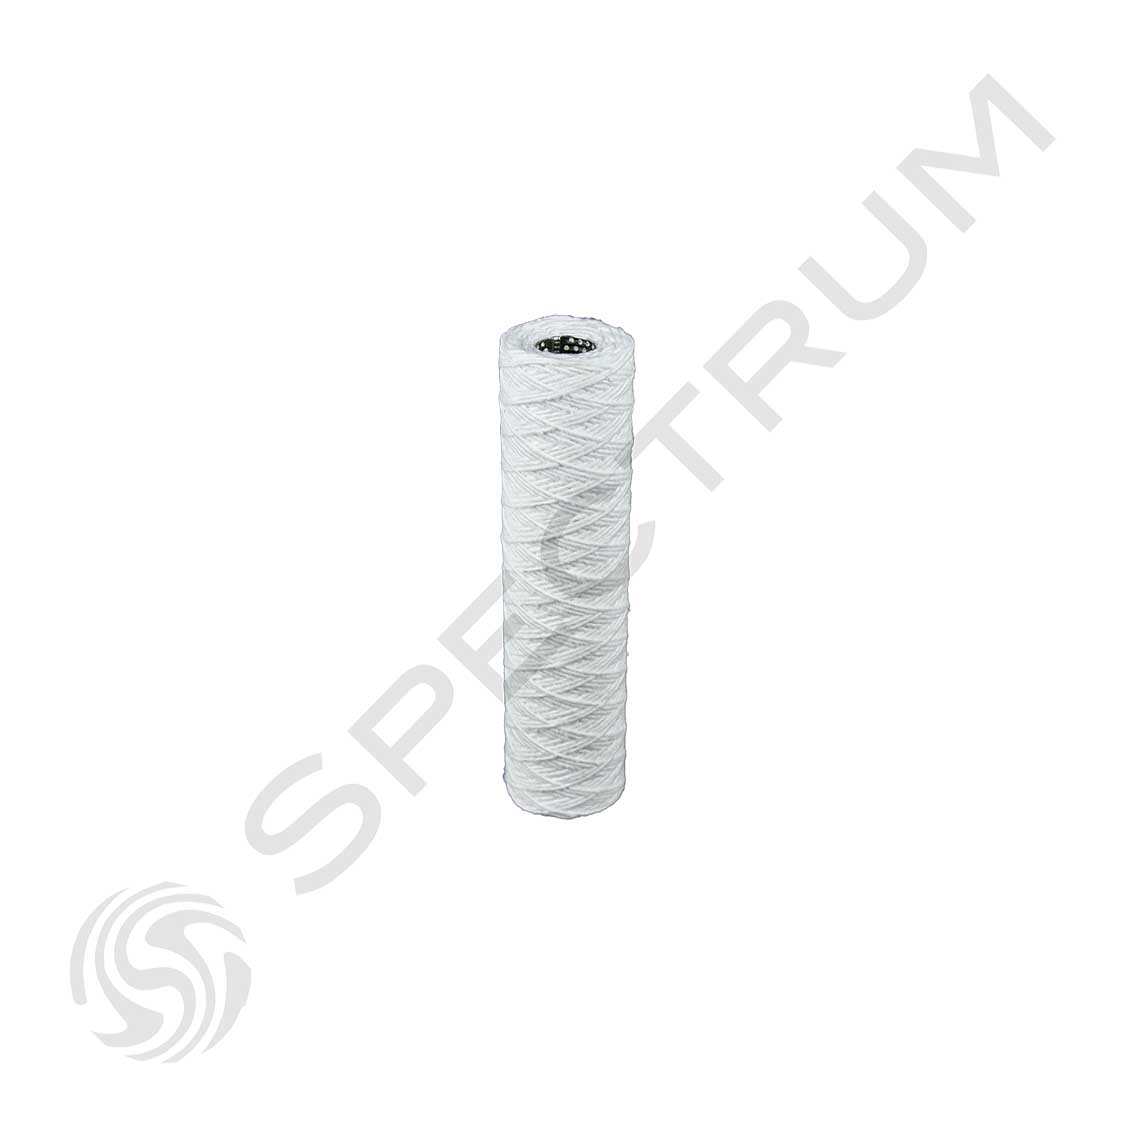 SPECTRUM SWC-50-10 Wound Cotton Filter Cartridge with Stainless Steel Core  50 micron  10